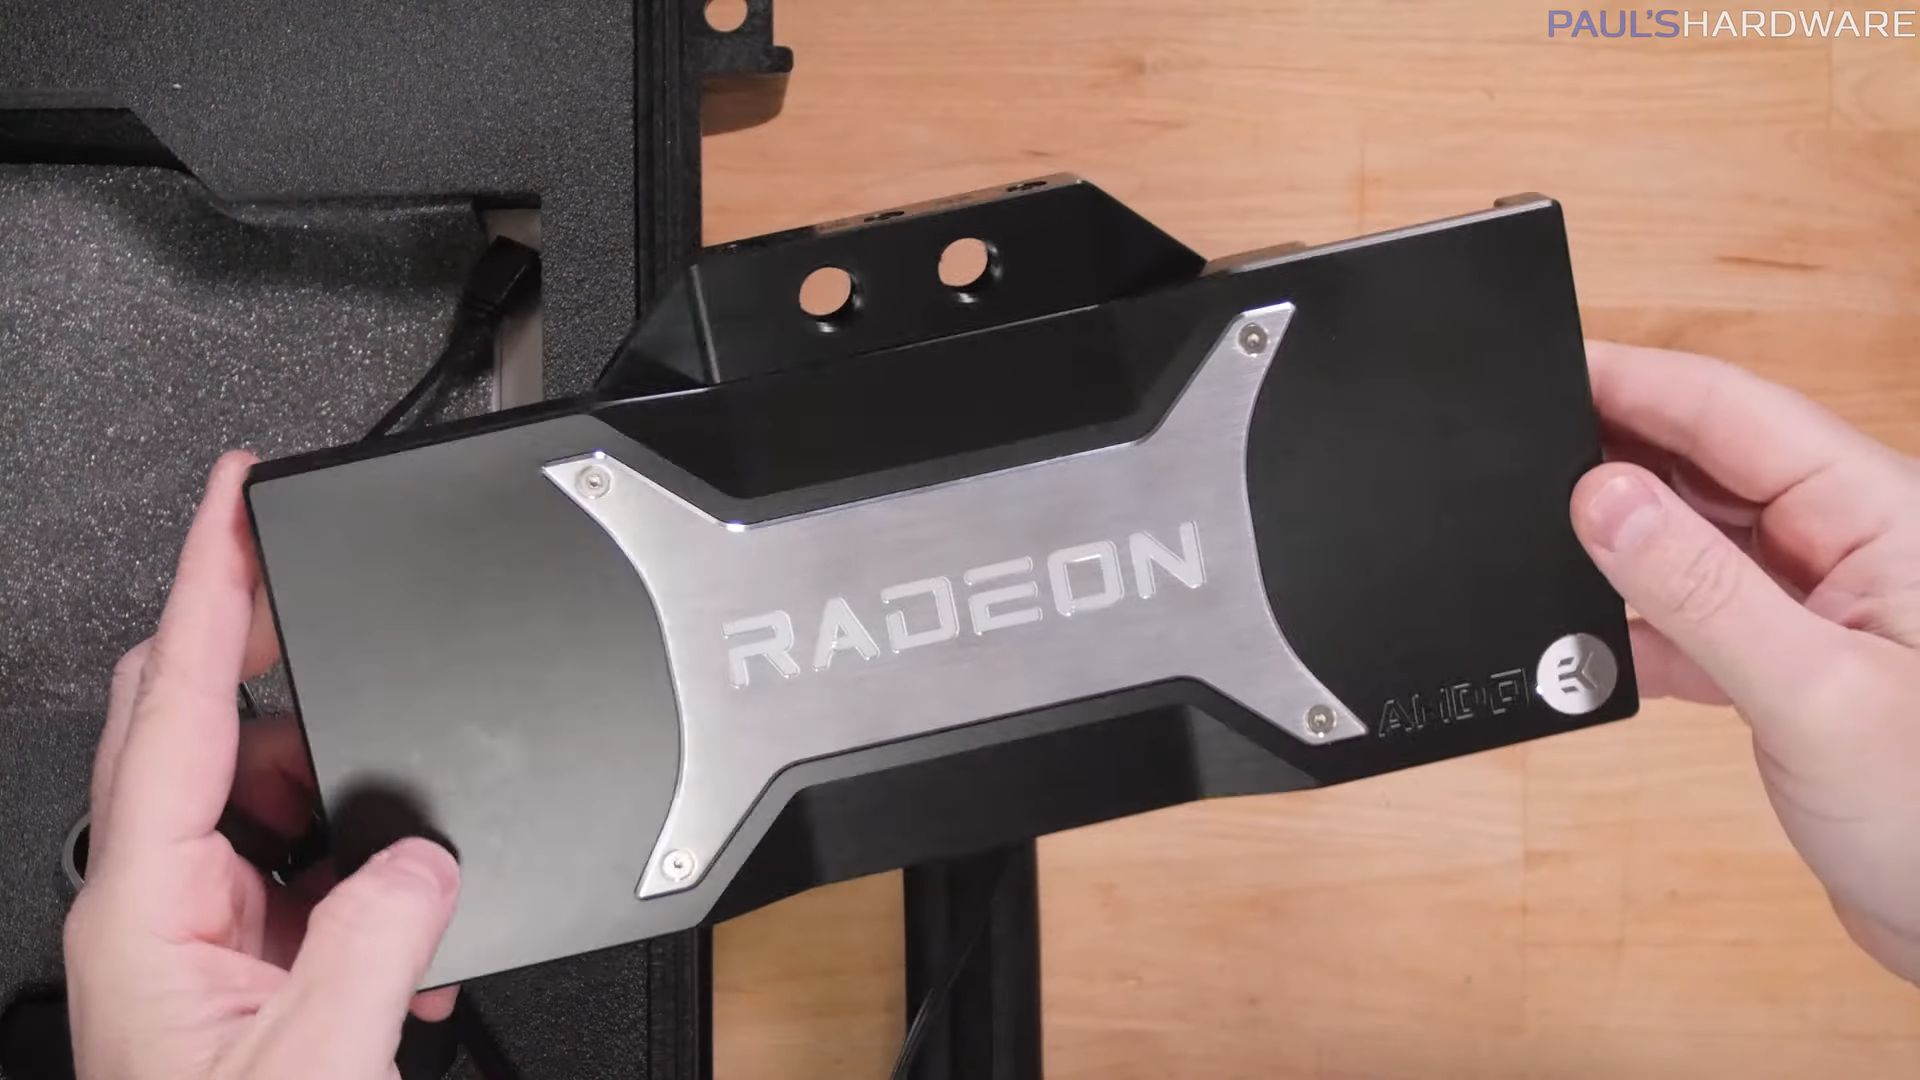 EKWB's complete water cooling kit for AMD Radeon RX and Ryzen 5000 series unboxed - VideoCardz.com